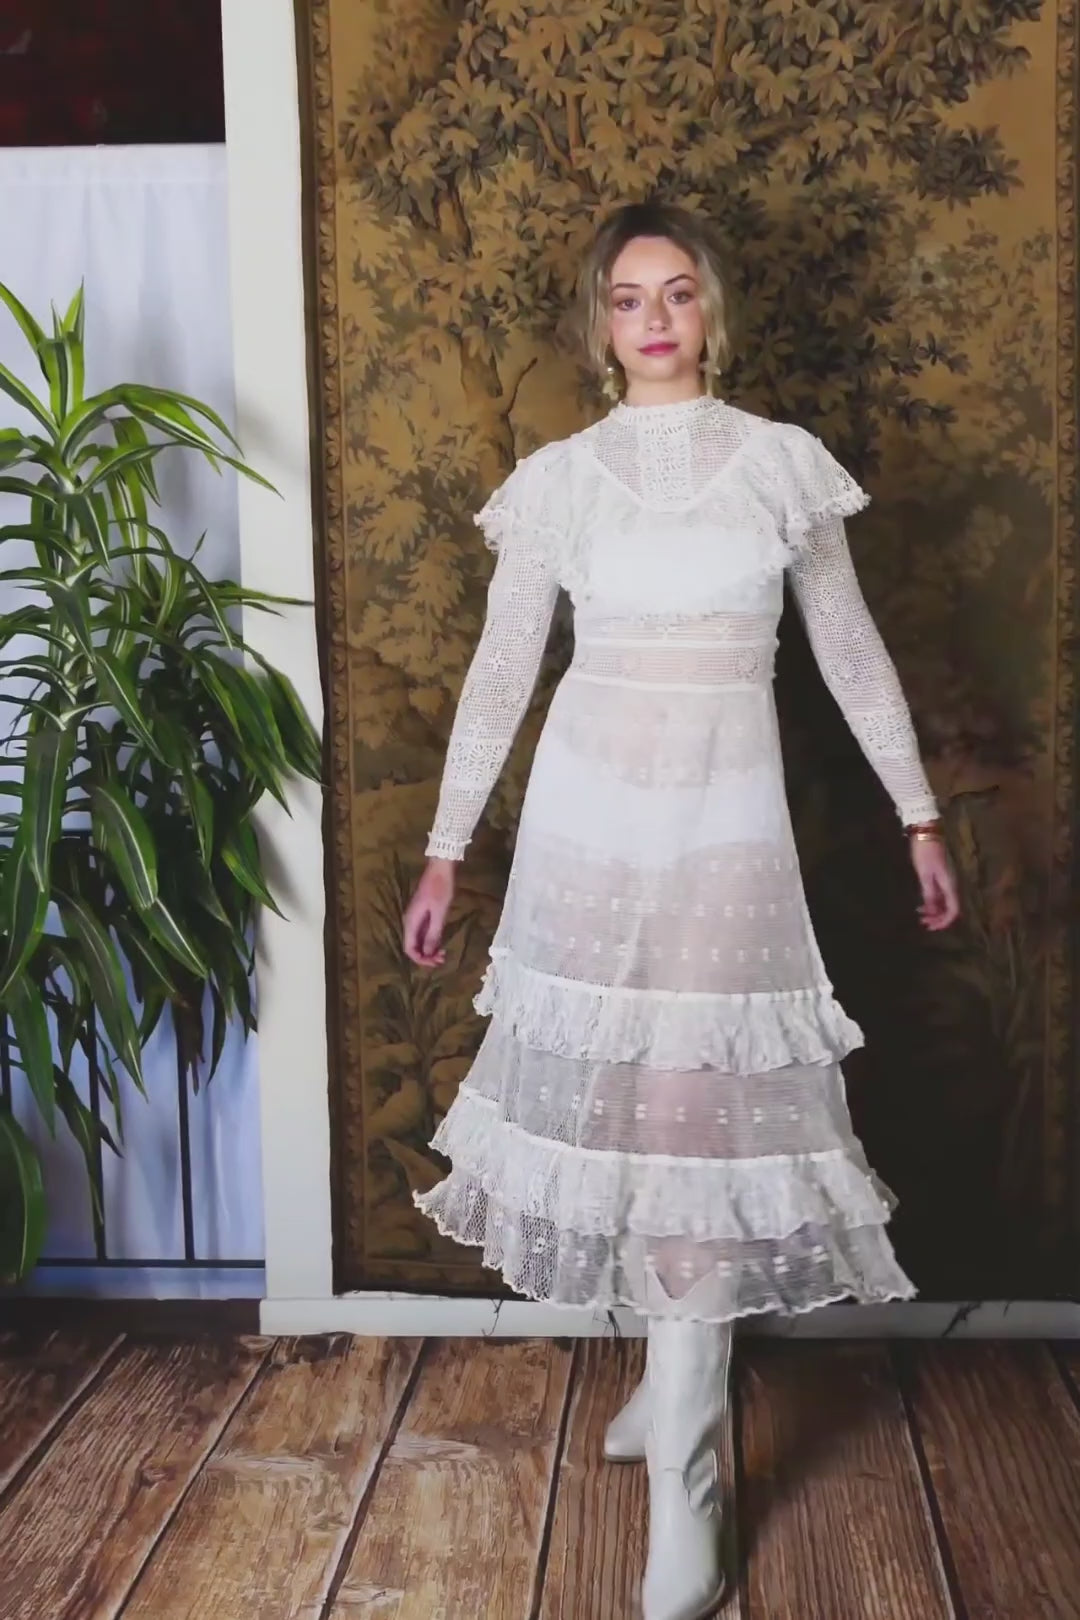 Video of model twirling around in Lim's white crohet maxi dress with two-tiered ruffled hem and ruffles at the collar.  